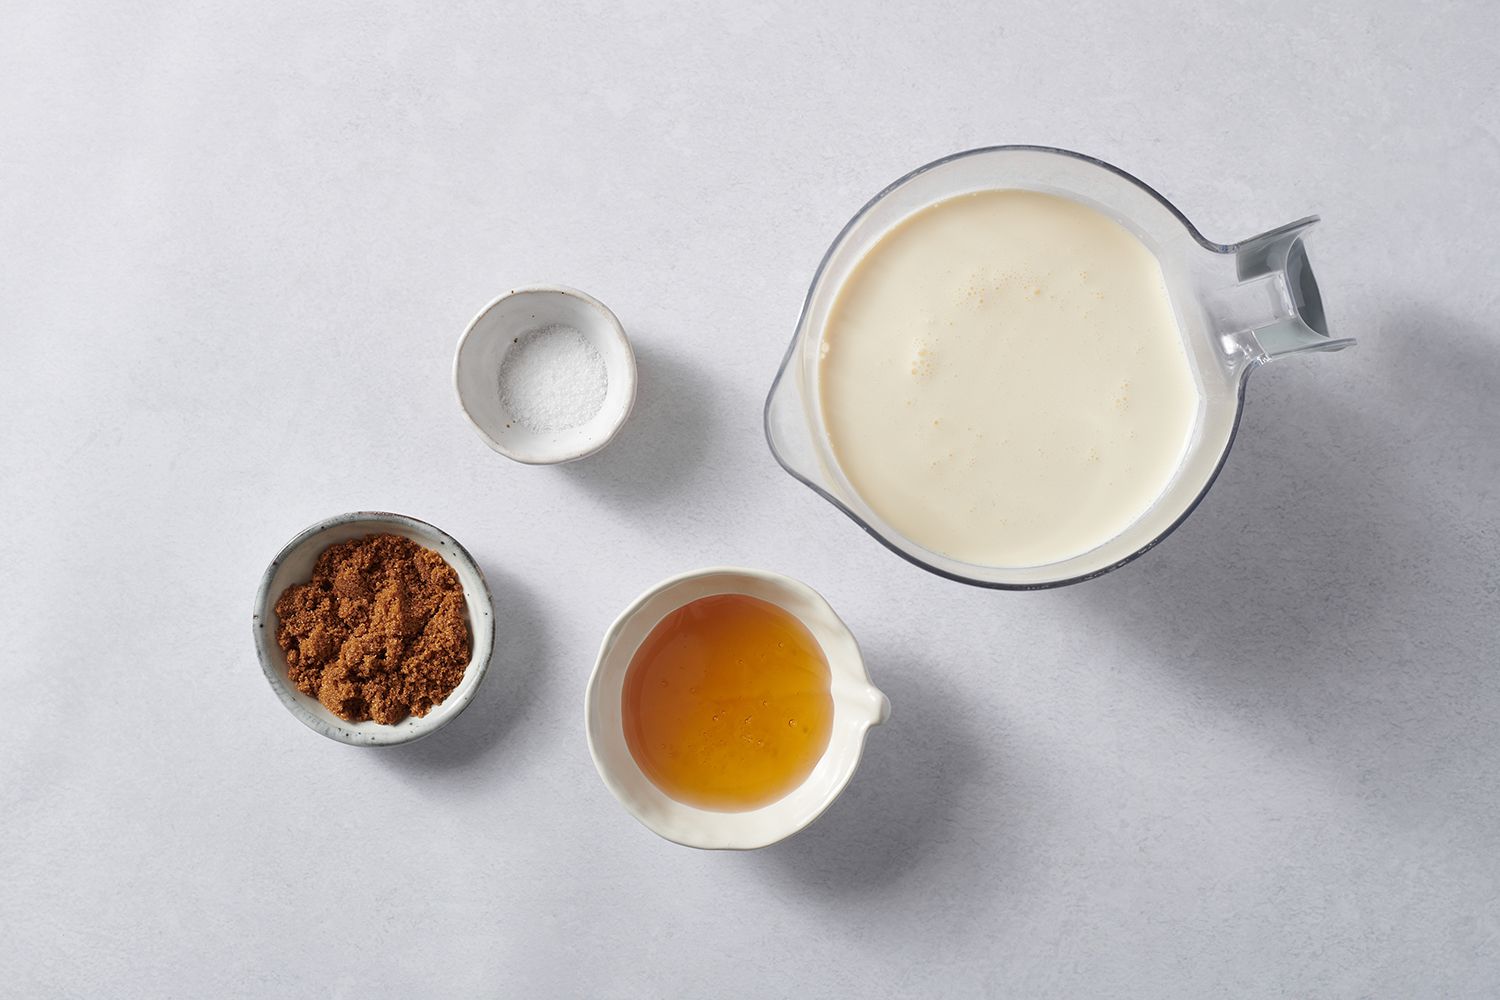 ingredients to make honey whipped cream